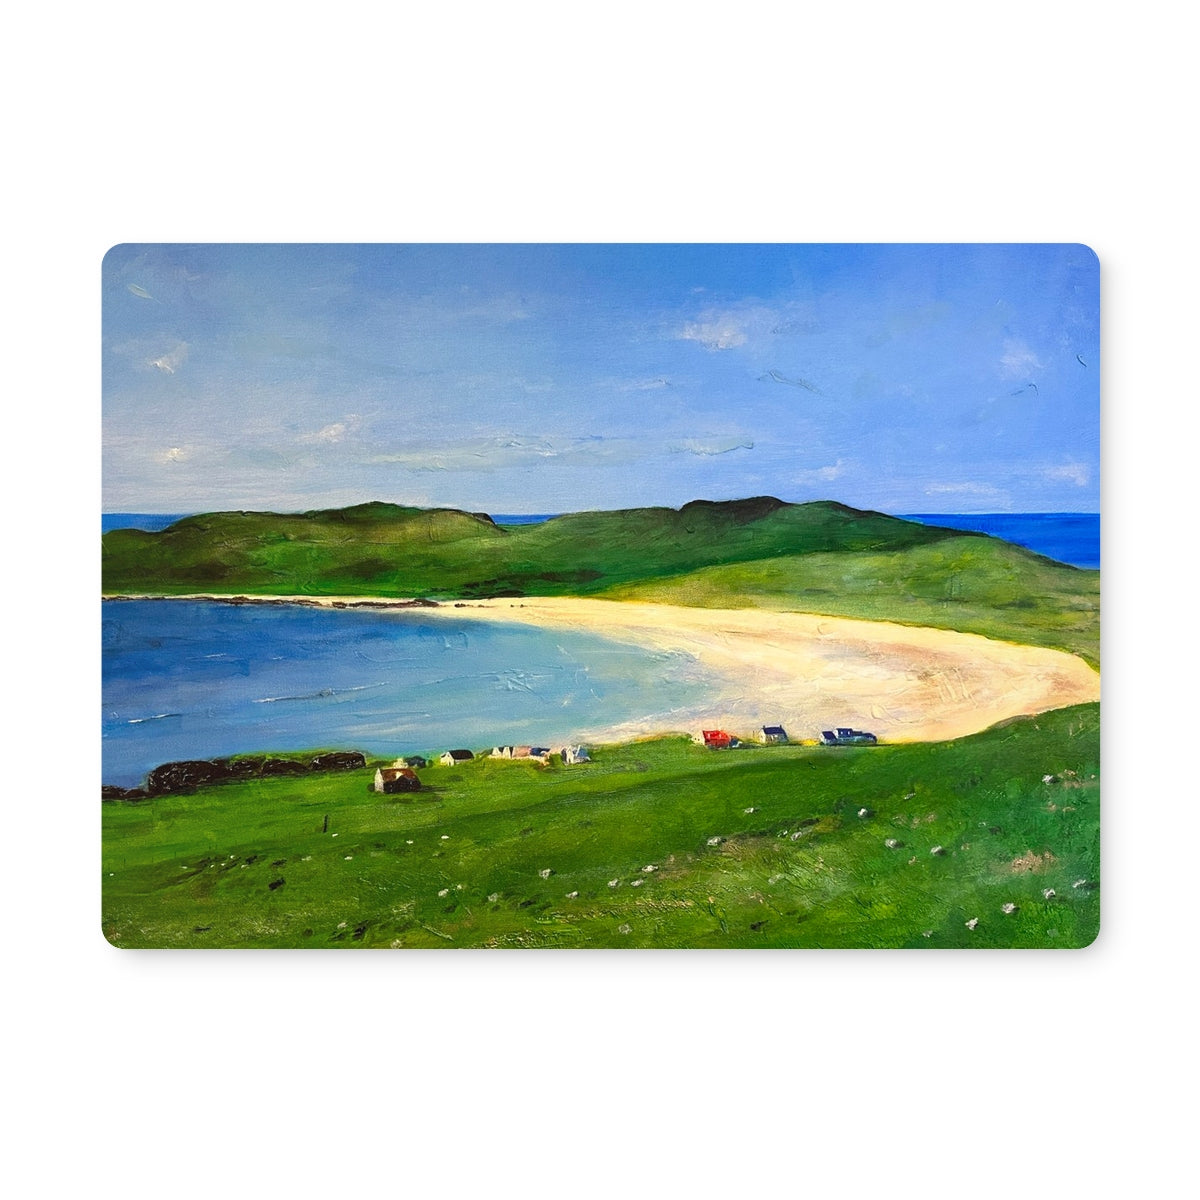 Balephuil Beach Tiree Art Gifts Placemat-Placemats-Hebridean Islands Art Gallery-Single Placemat-Paintings, Prints, Homeware, Art Gifts From Scotland By Scottish Artist Kevin Hunter